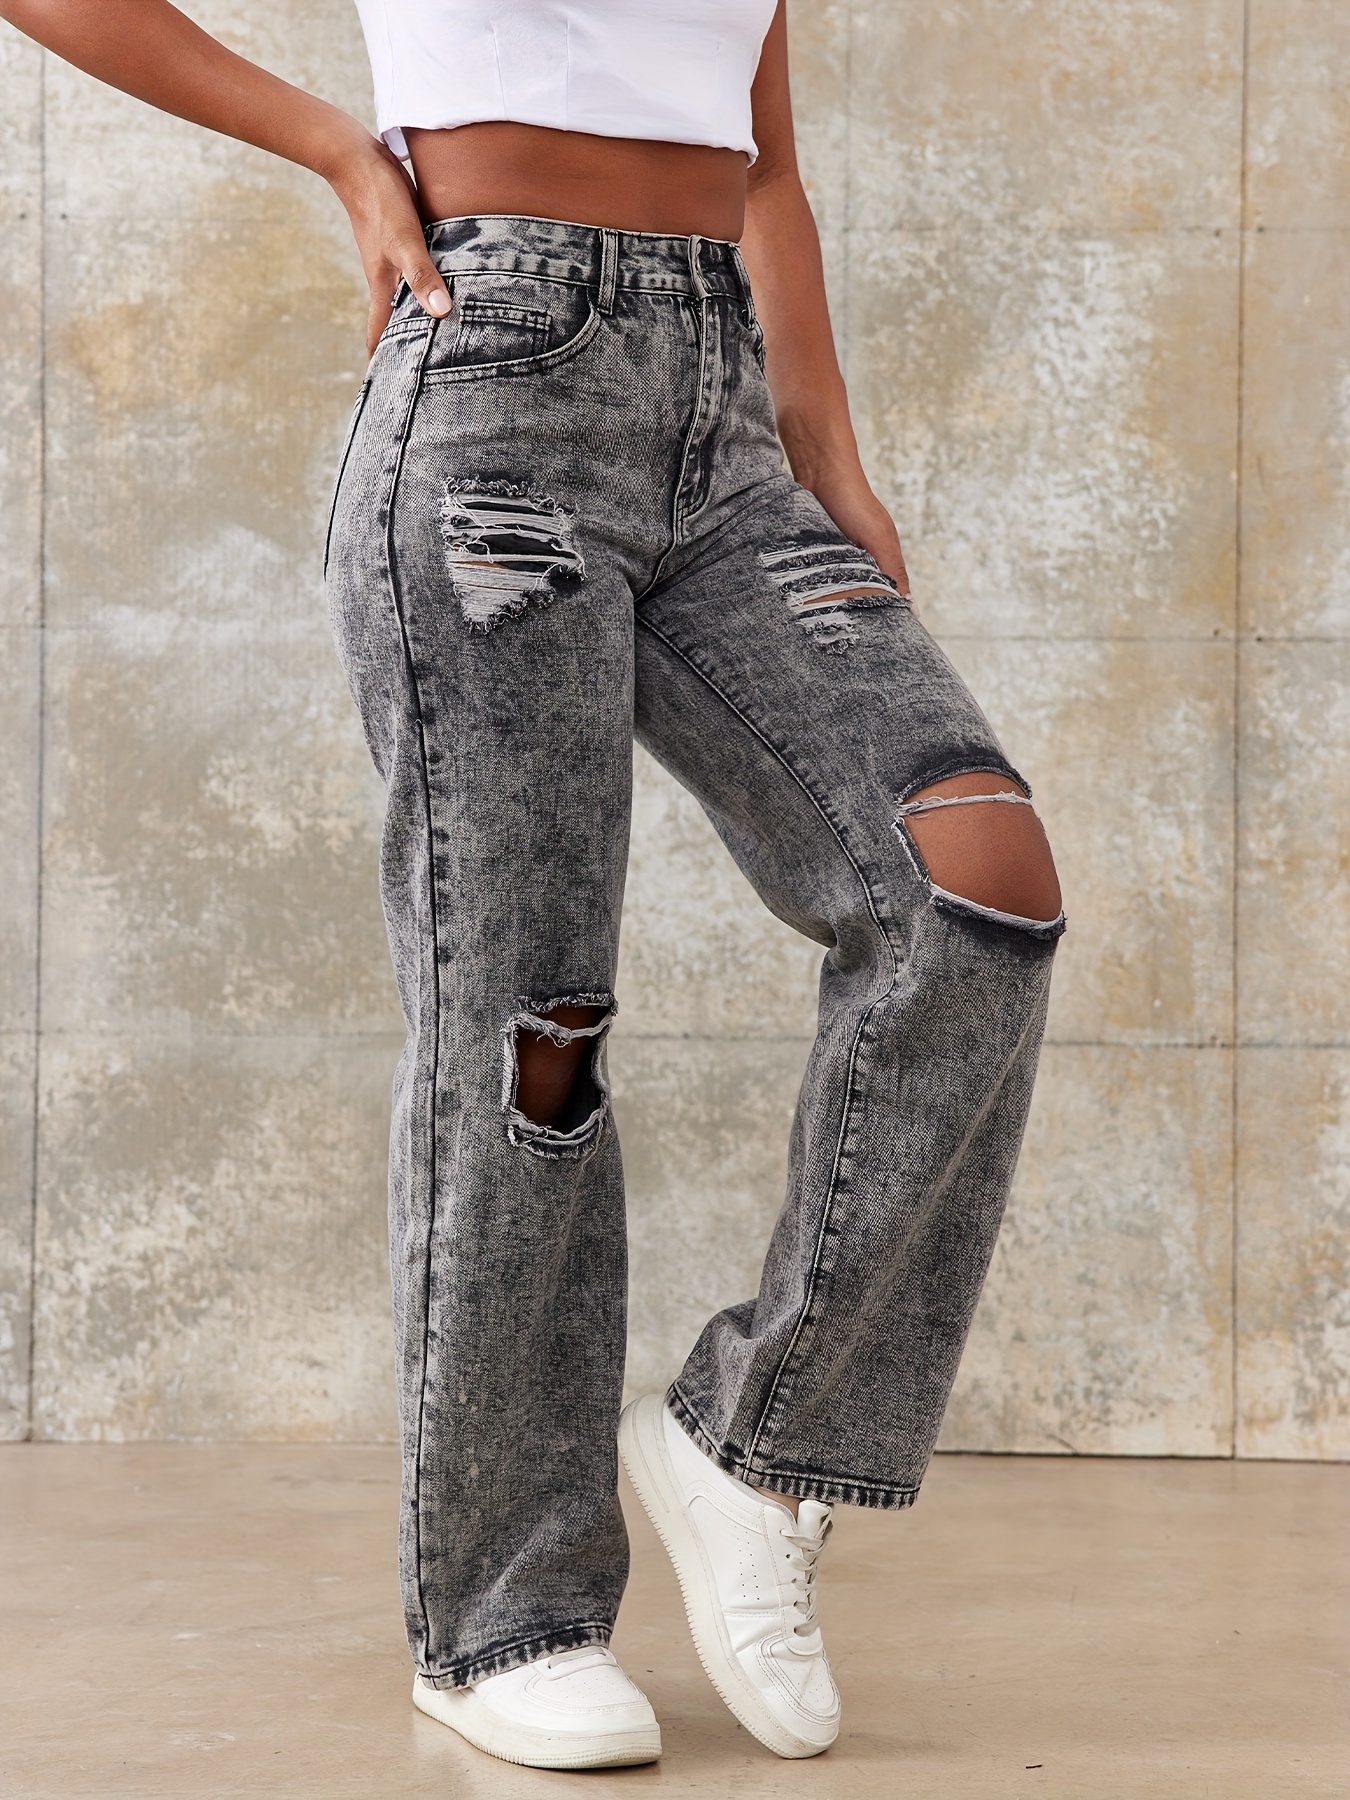 Grey Ripped Holes Straight Jeans, Loose Fit Non-Stretch Distressed Denim  Pants, Women's Denim Jeans & Clothing